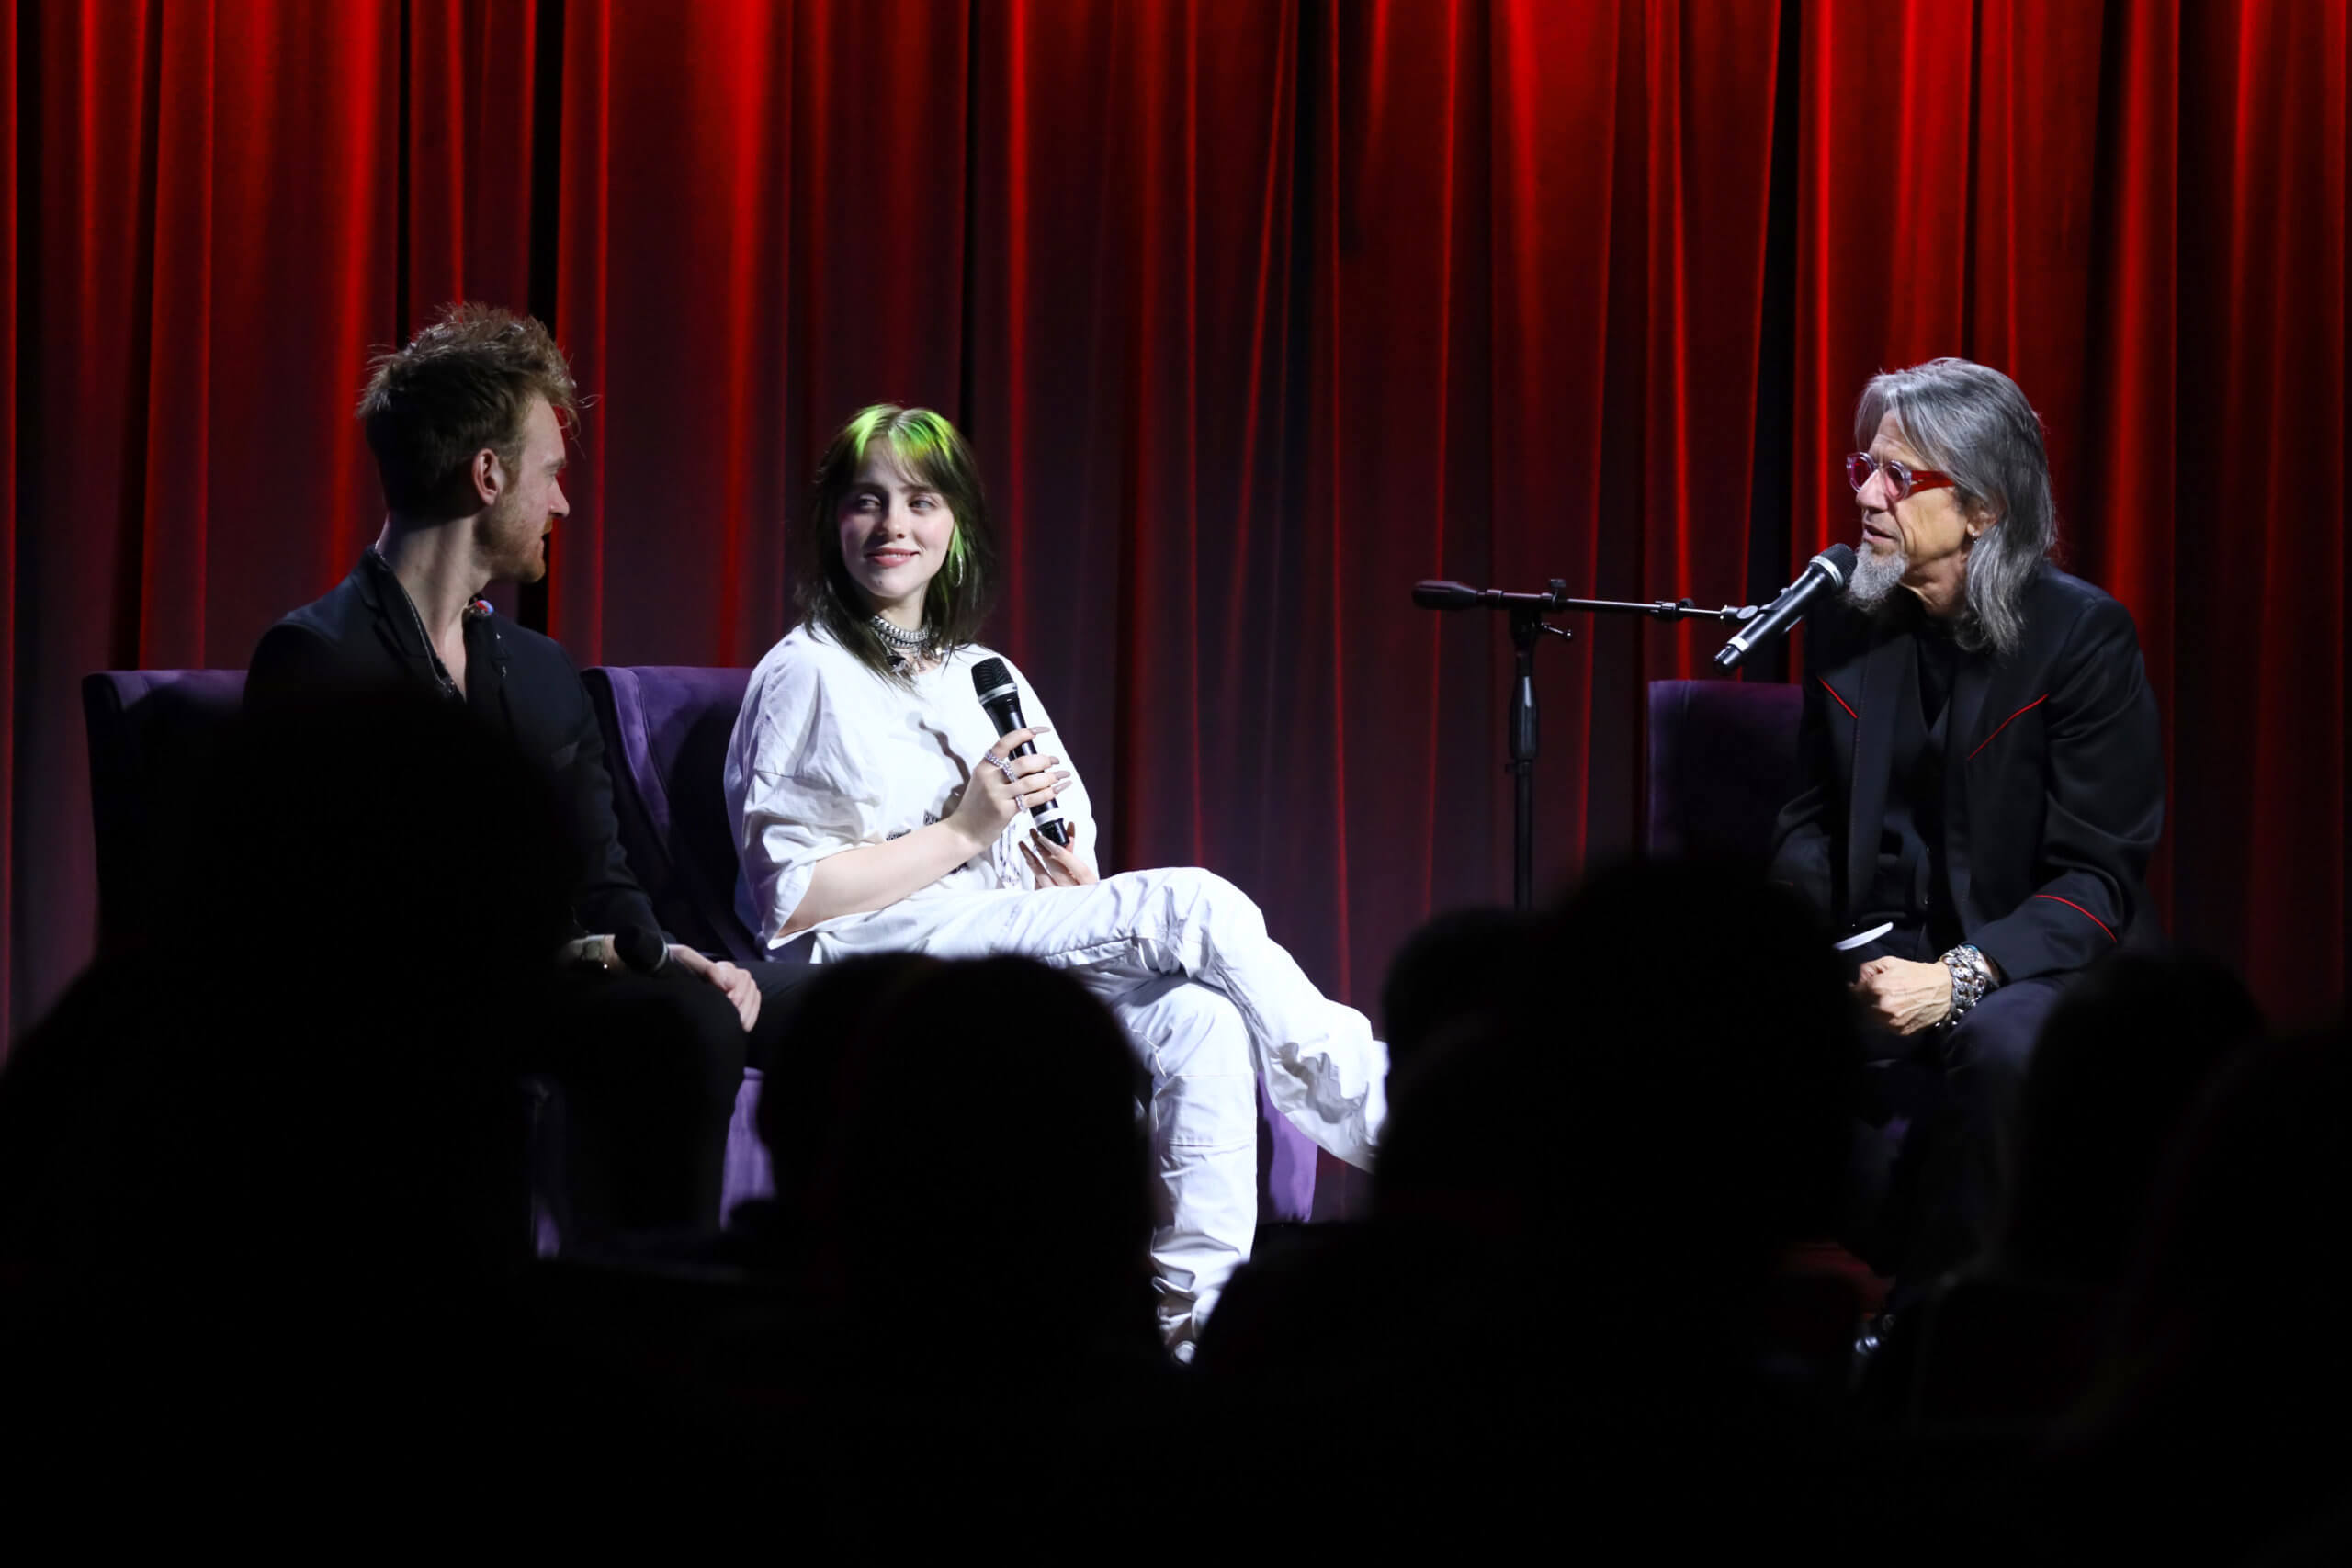 Billie Eilish and FINNEAS in conversation at the GRAMMY Museum / Photo courtesy of GRAMMY Museum